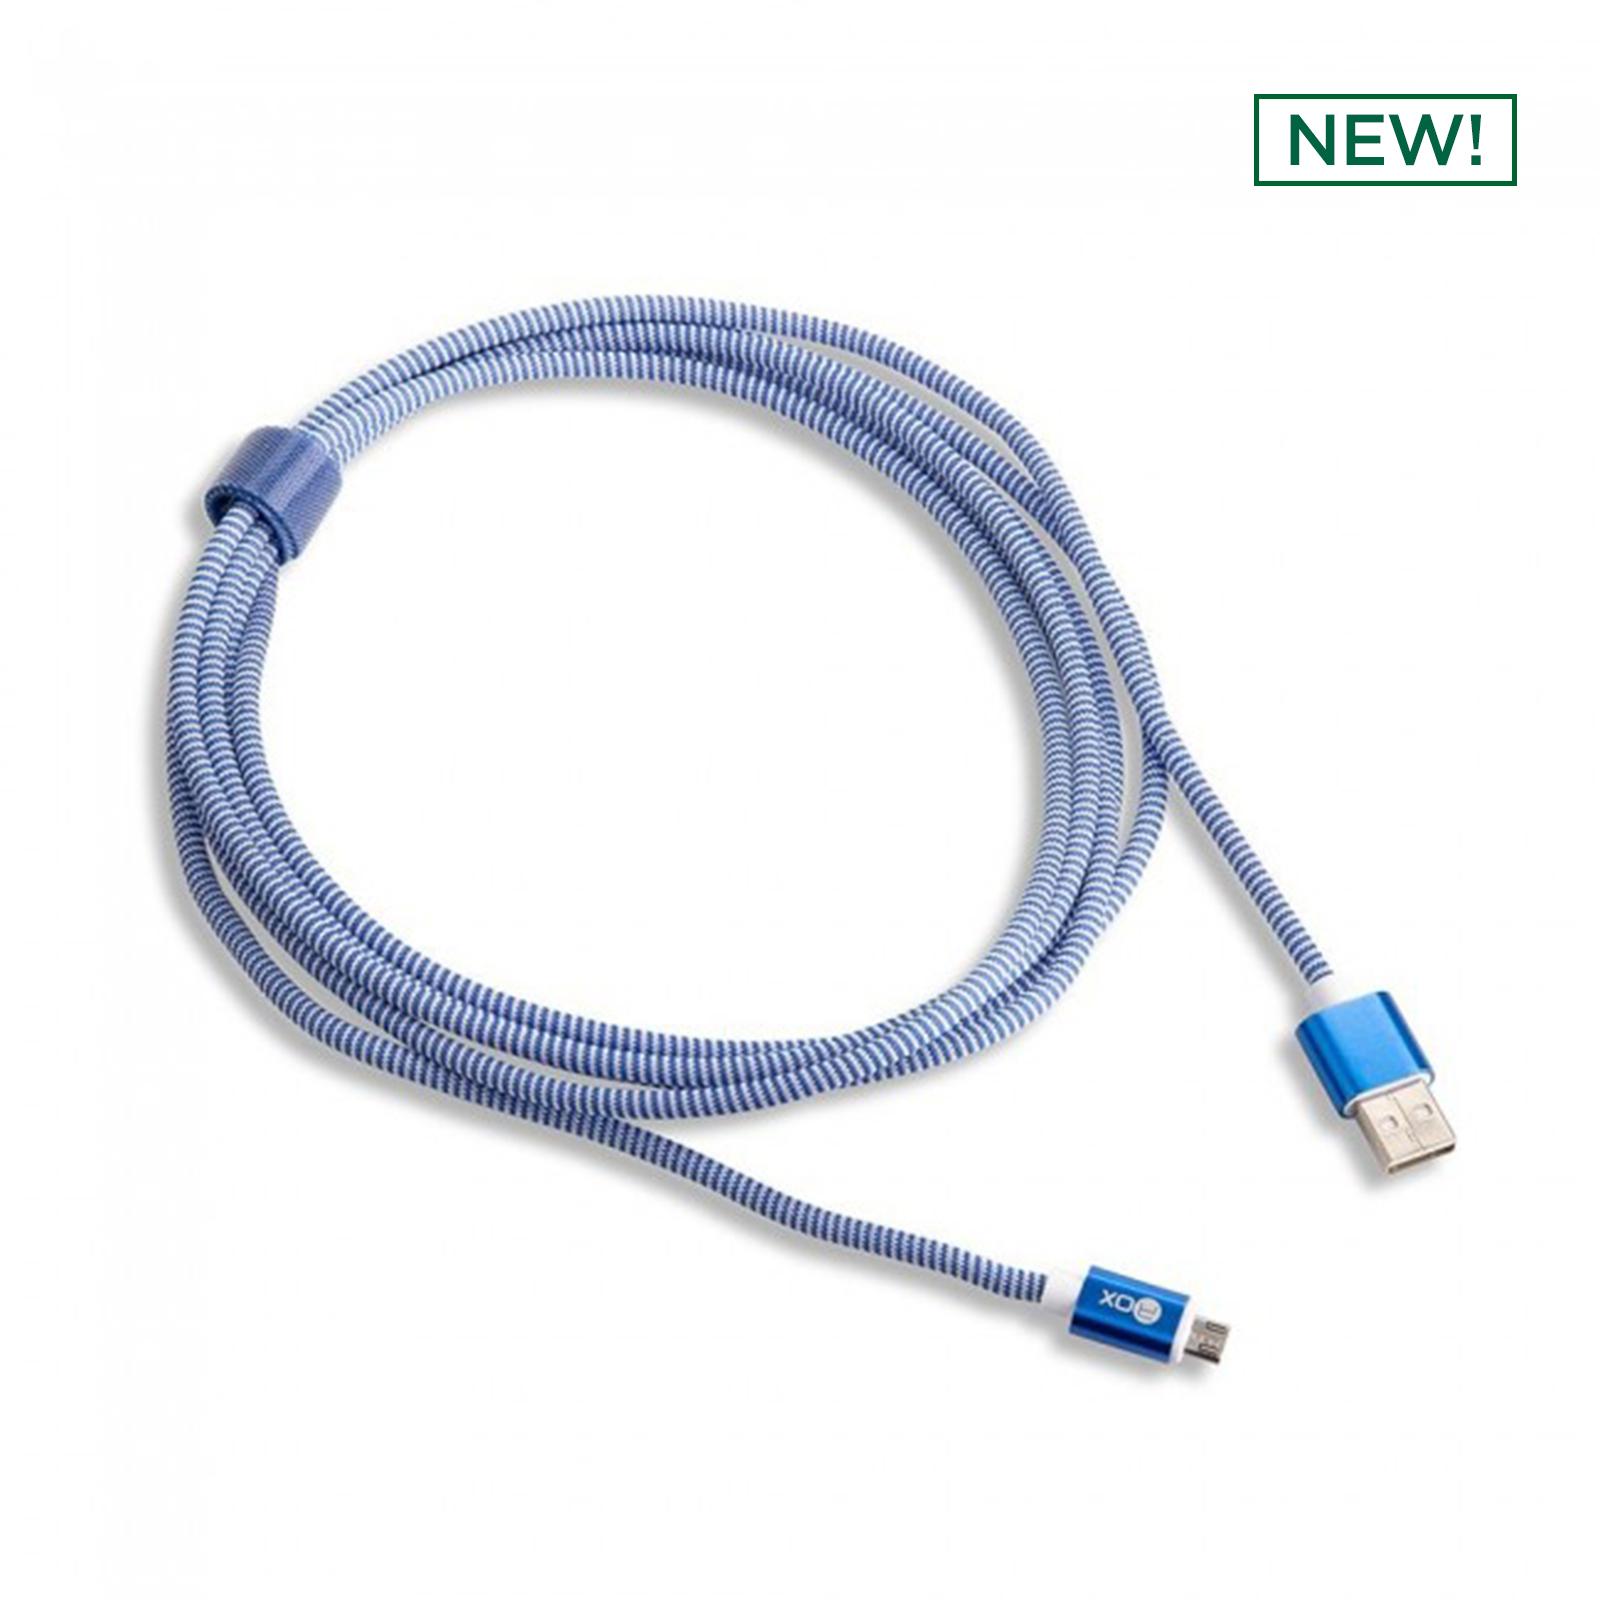 10FT MICRO USB CABLE